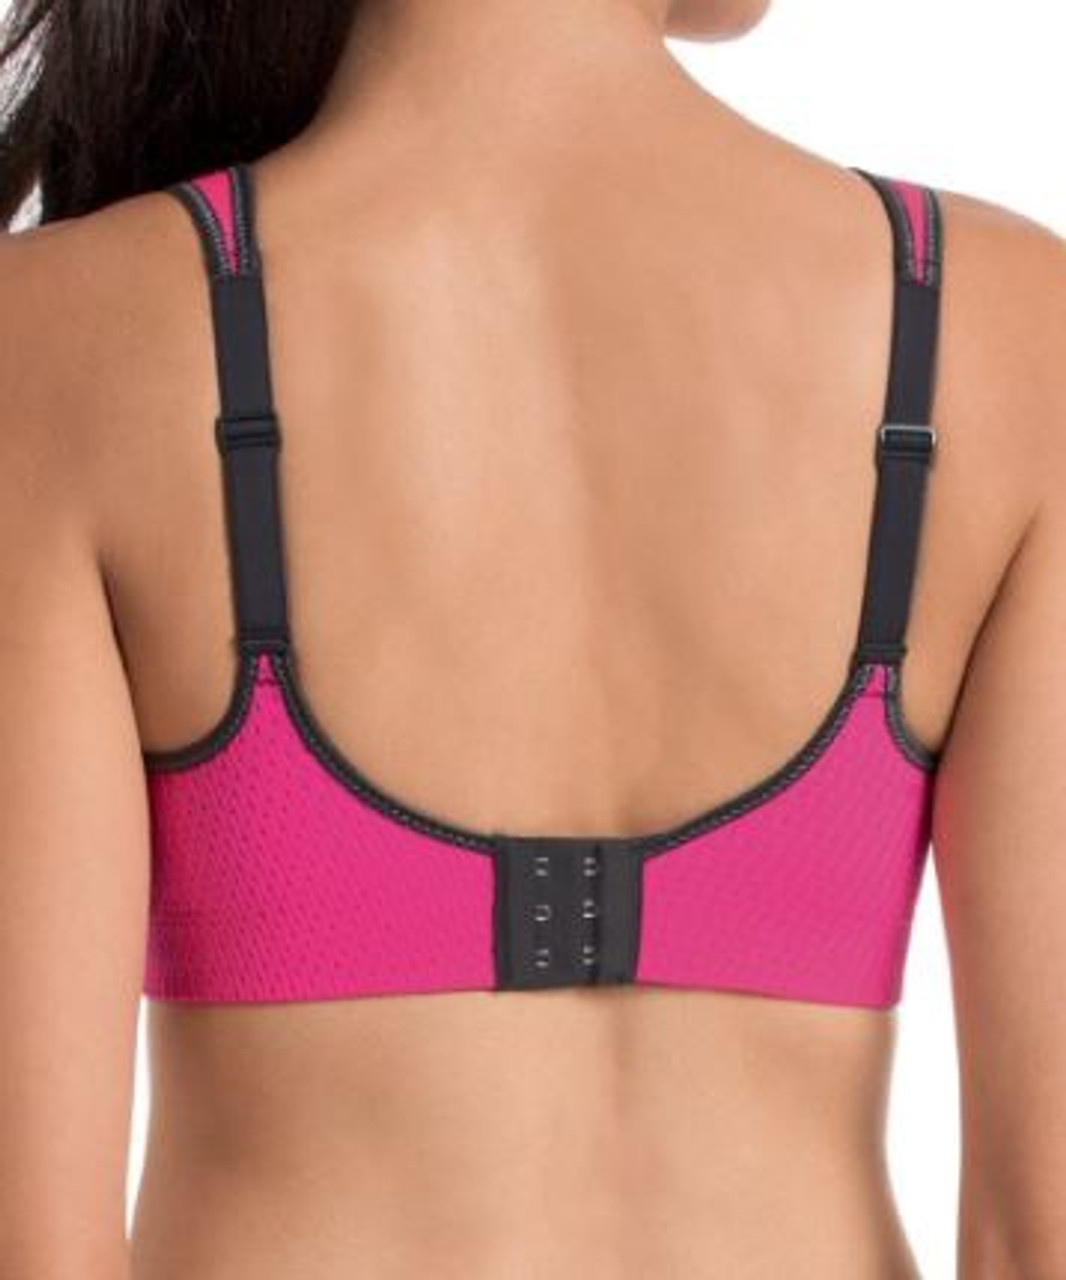  5544-107 Womens Active Smart Rose Pink Padded Sports Bra 34H